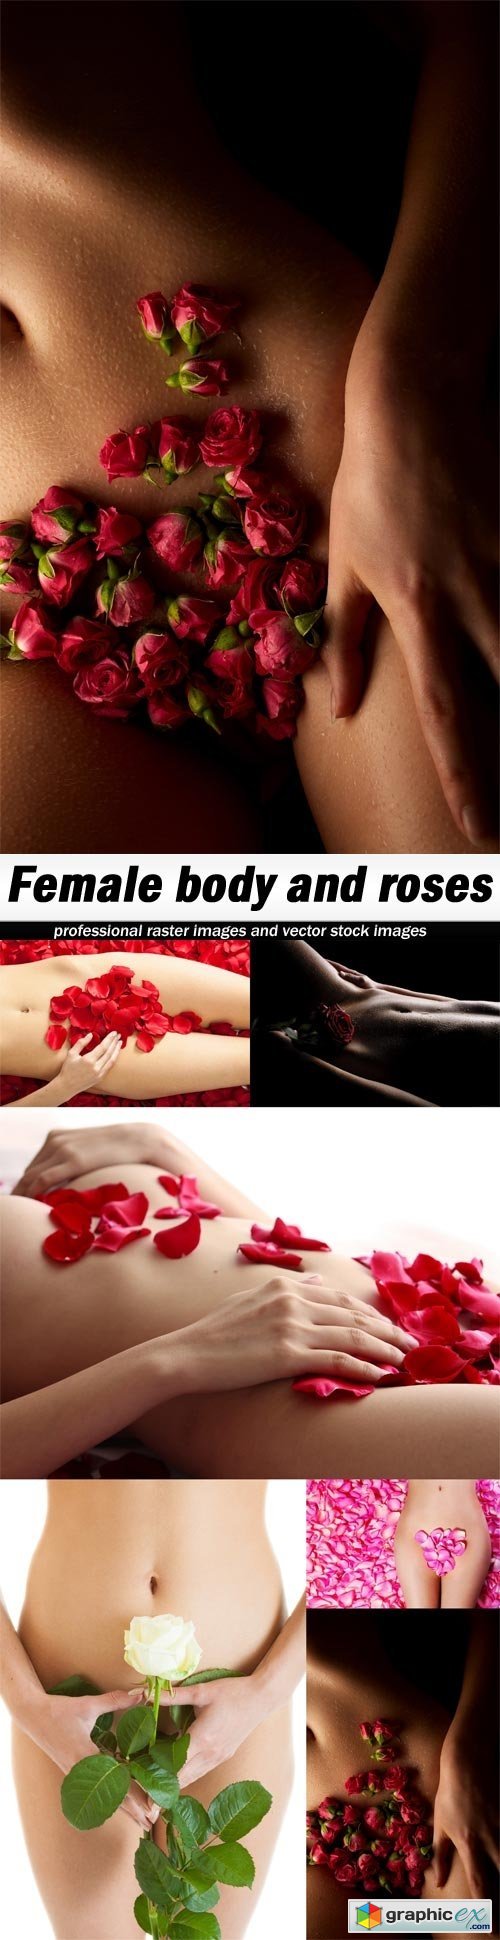 Female body and roses